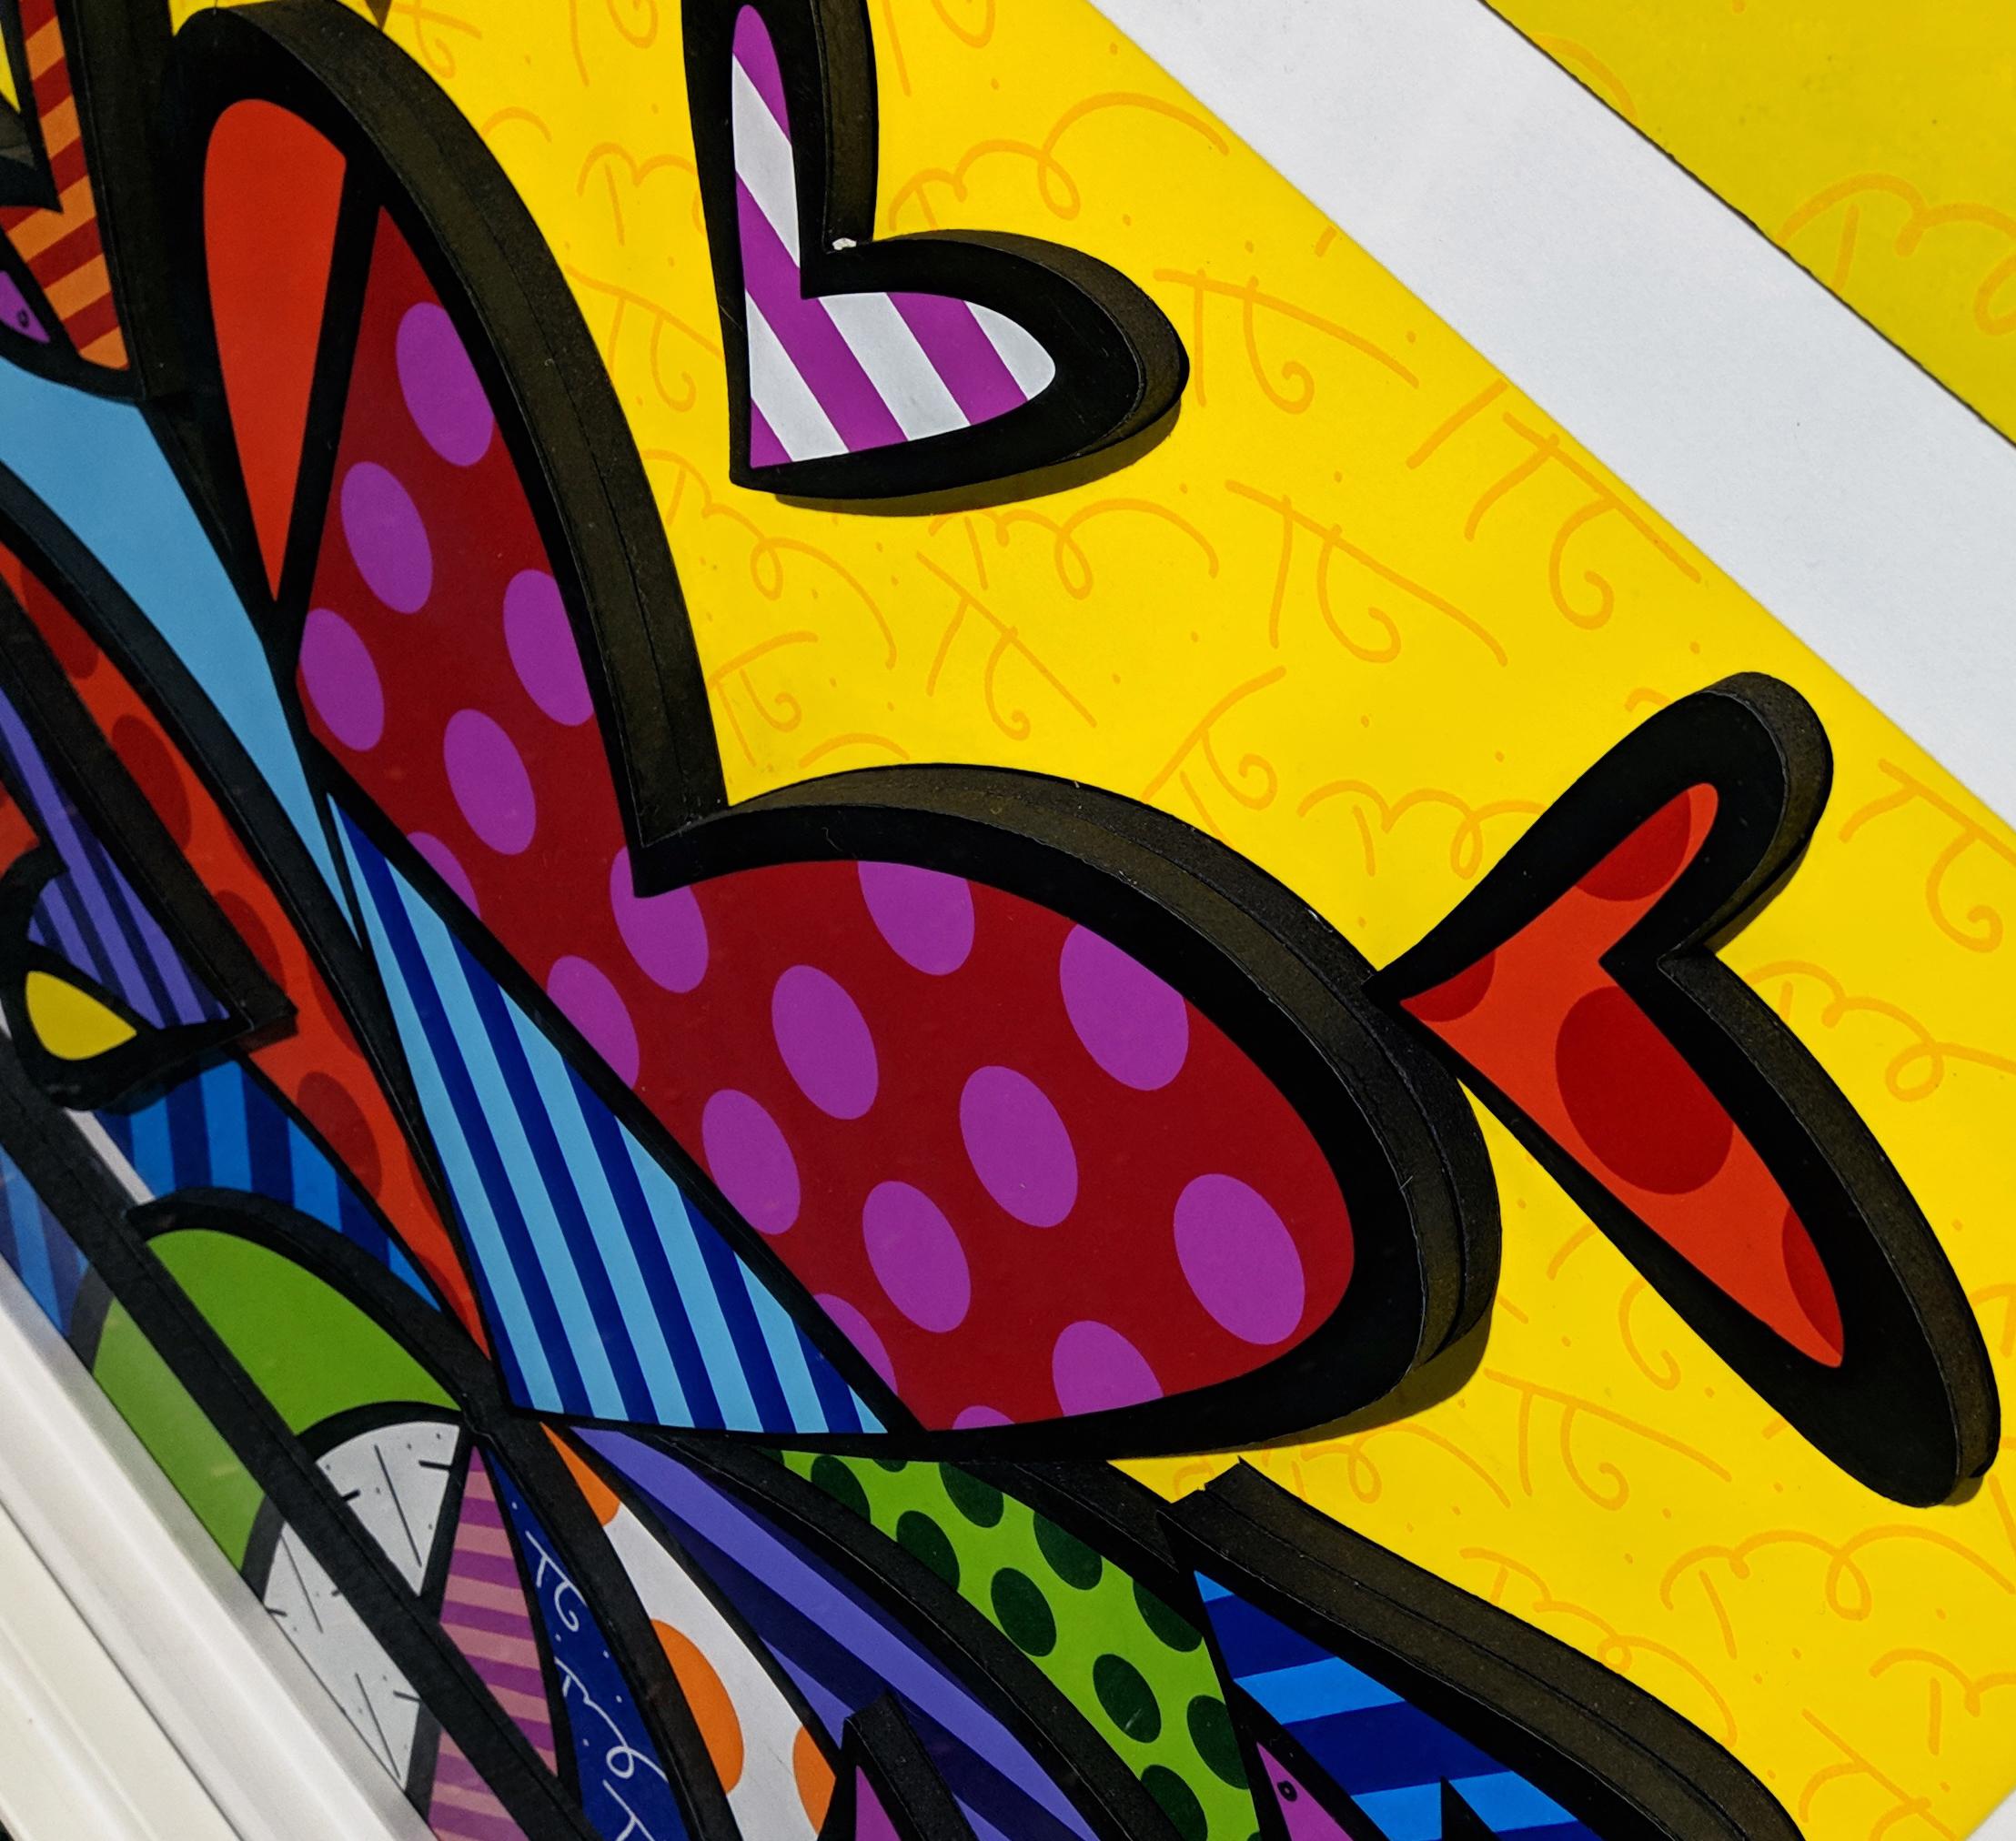 I LOVE THIS LAND (3D MIXED MEDIA) - Print by Romero Britto